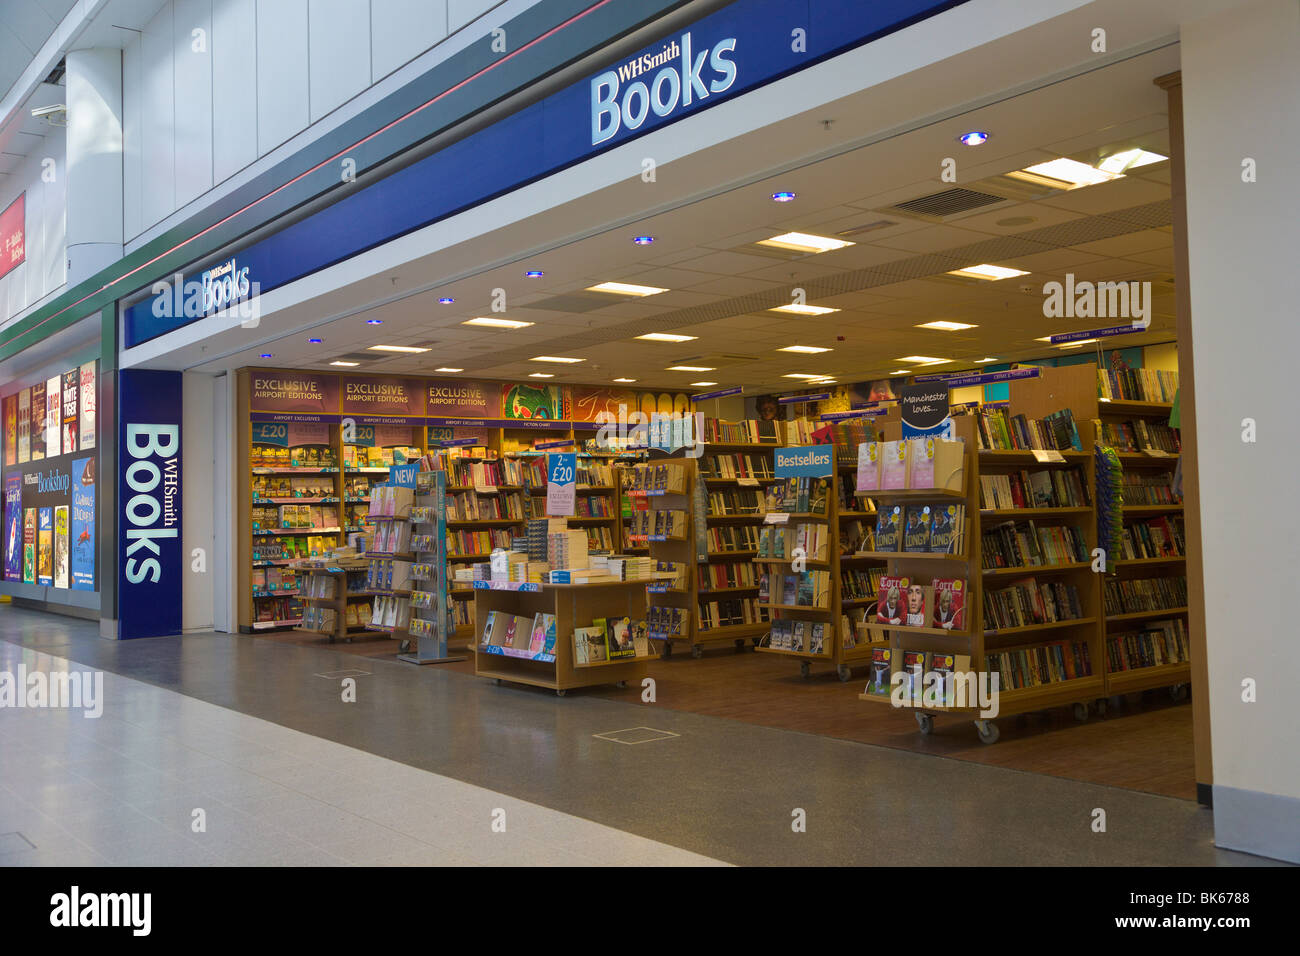 'W H Smith' Bookshop, Manchester Airport, Manchester, England Stock Photo